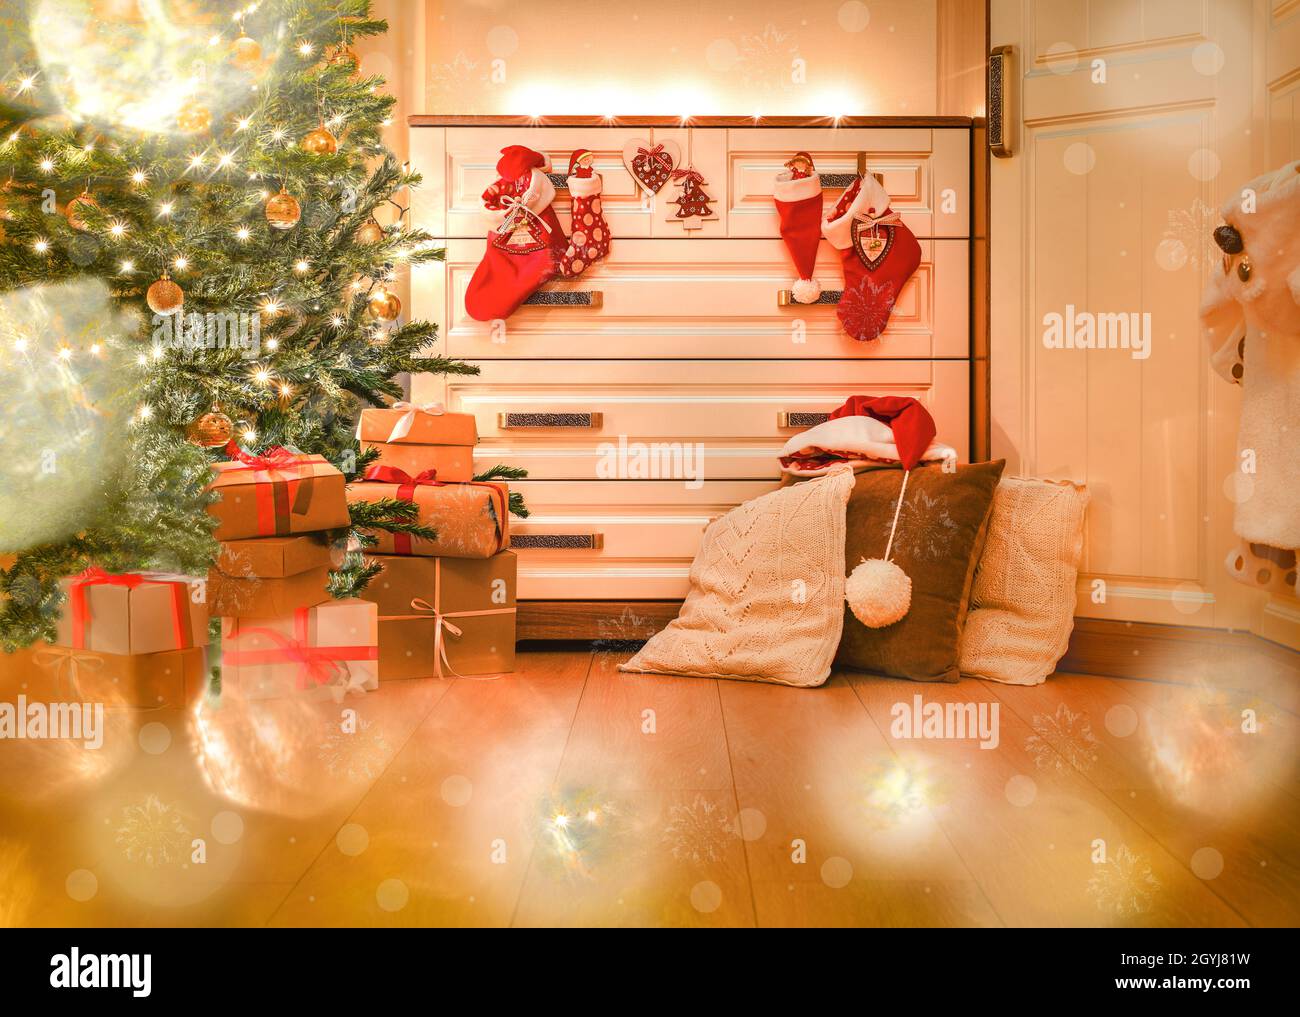 Brightly decorated room at Christmas. Gifts under the Christmas tree and in Santa's boots. Stock Photo